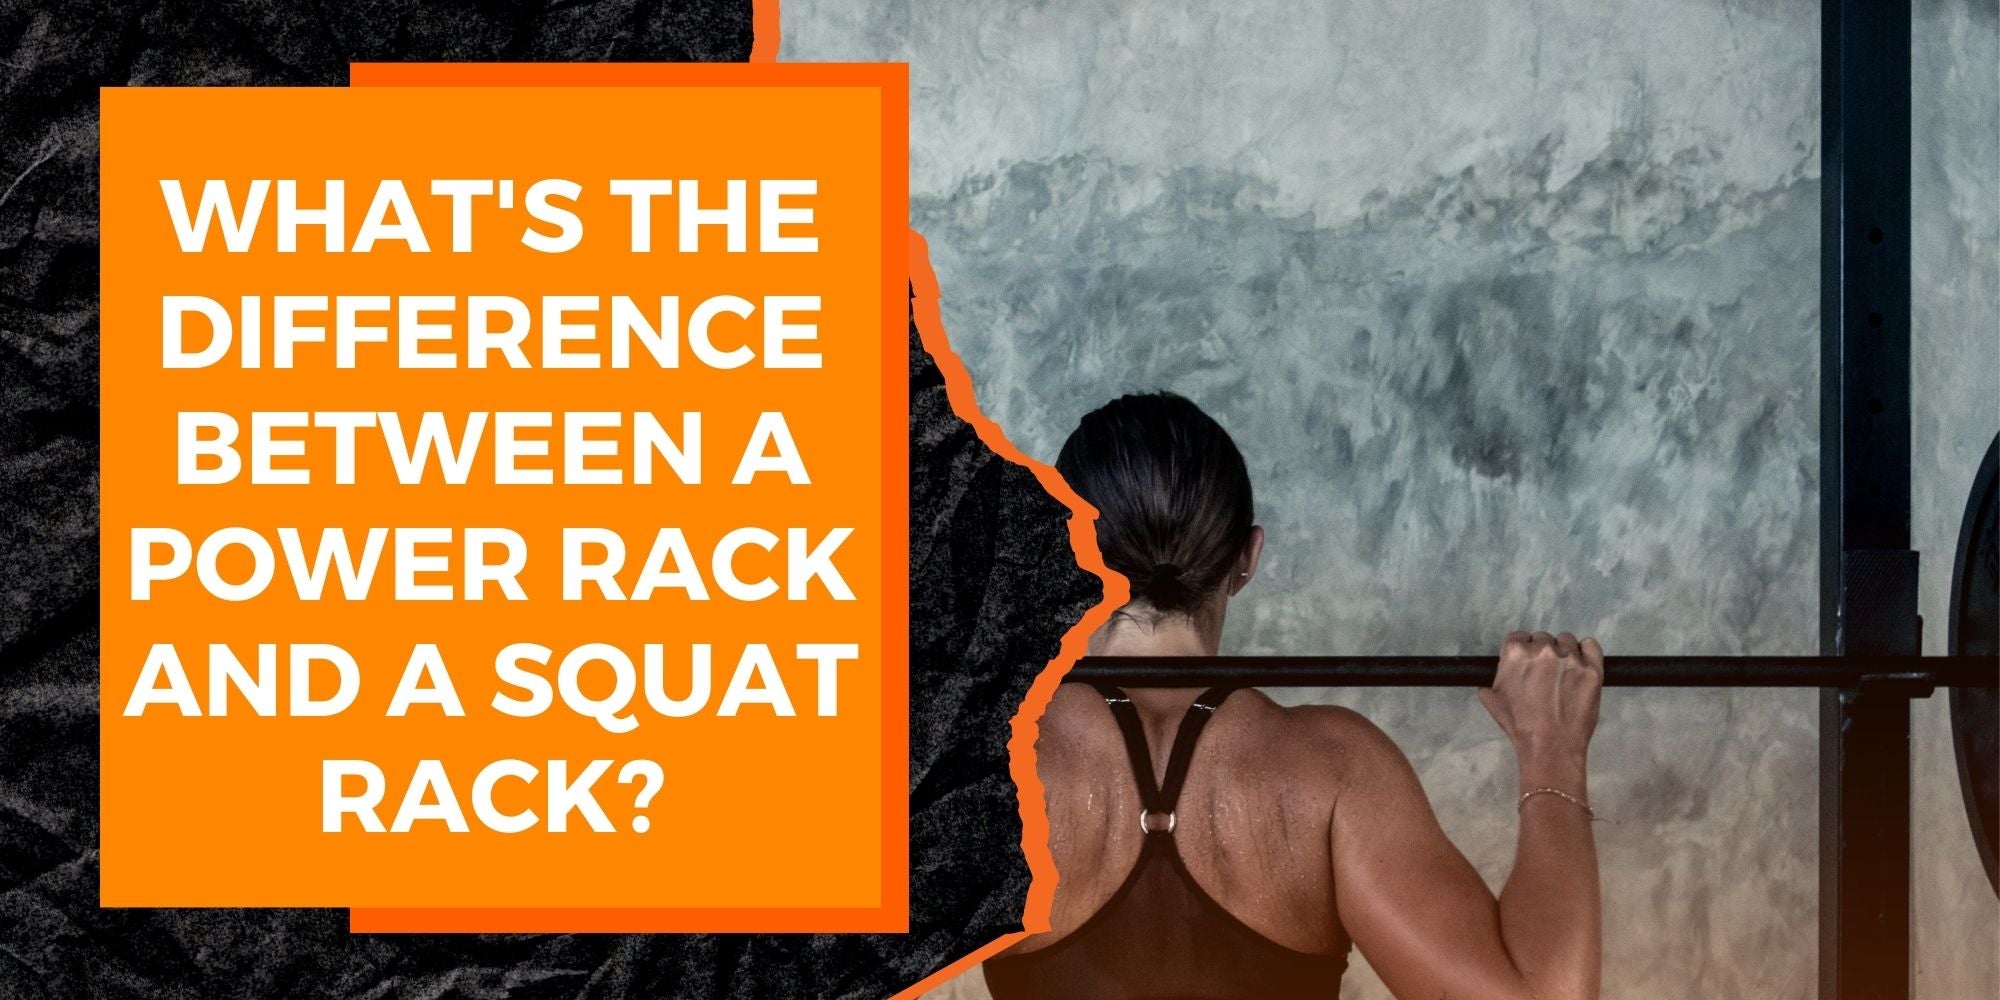 What's The Difference Between a Power Rack and a Squat Rack?